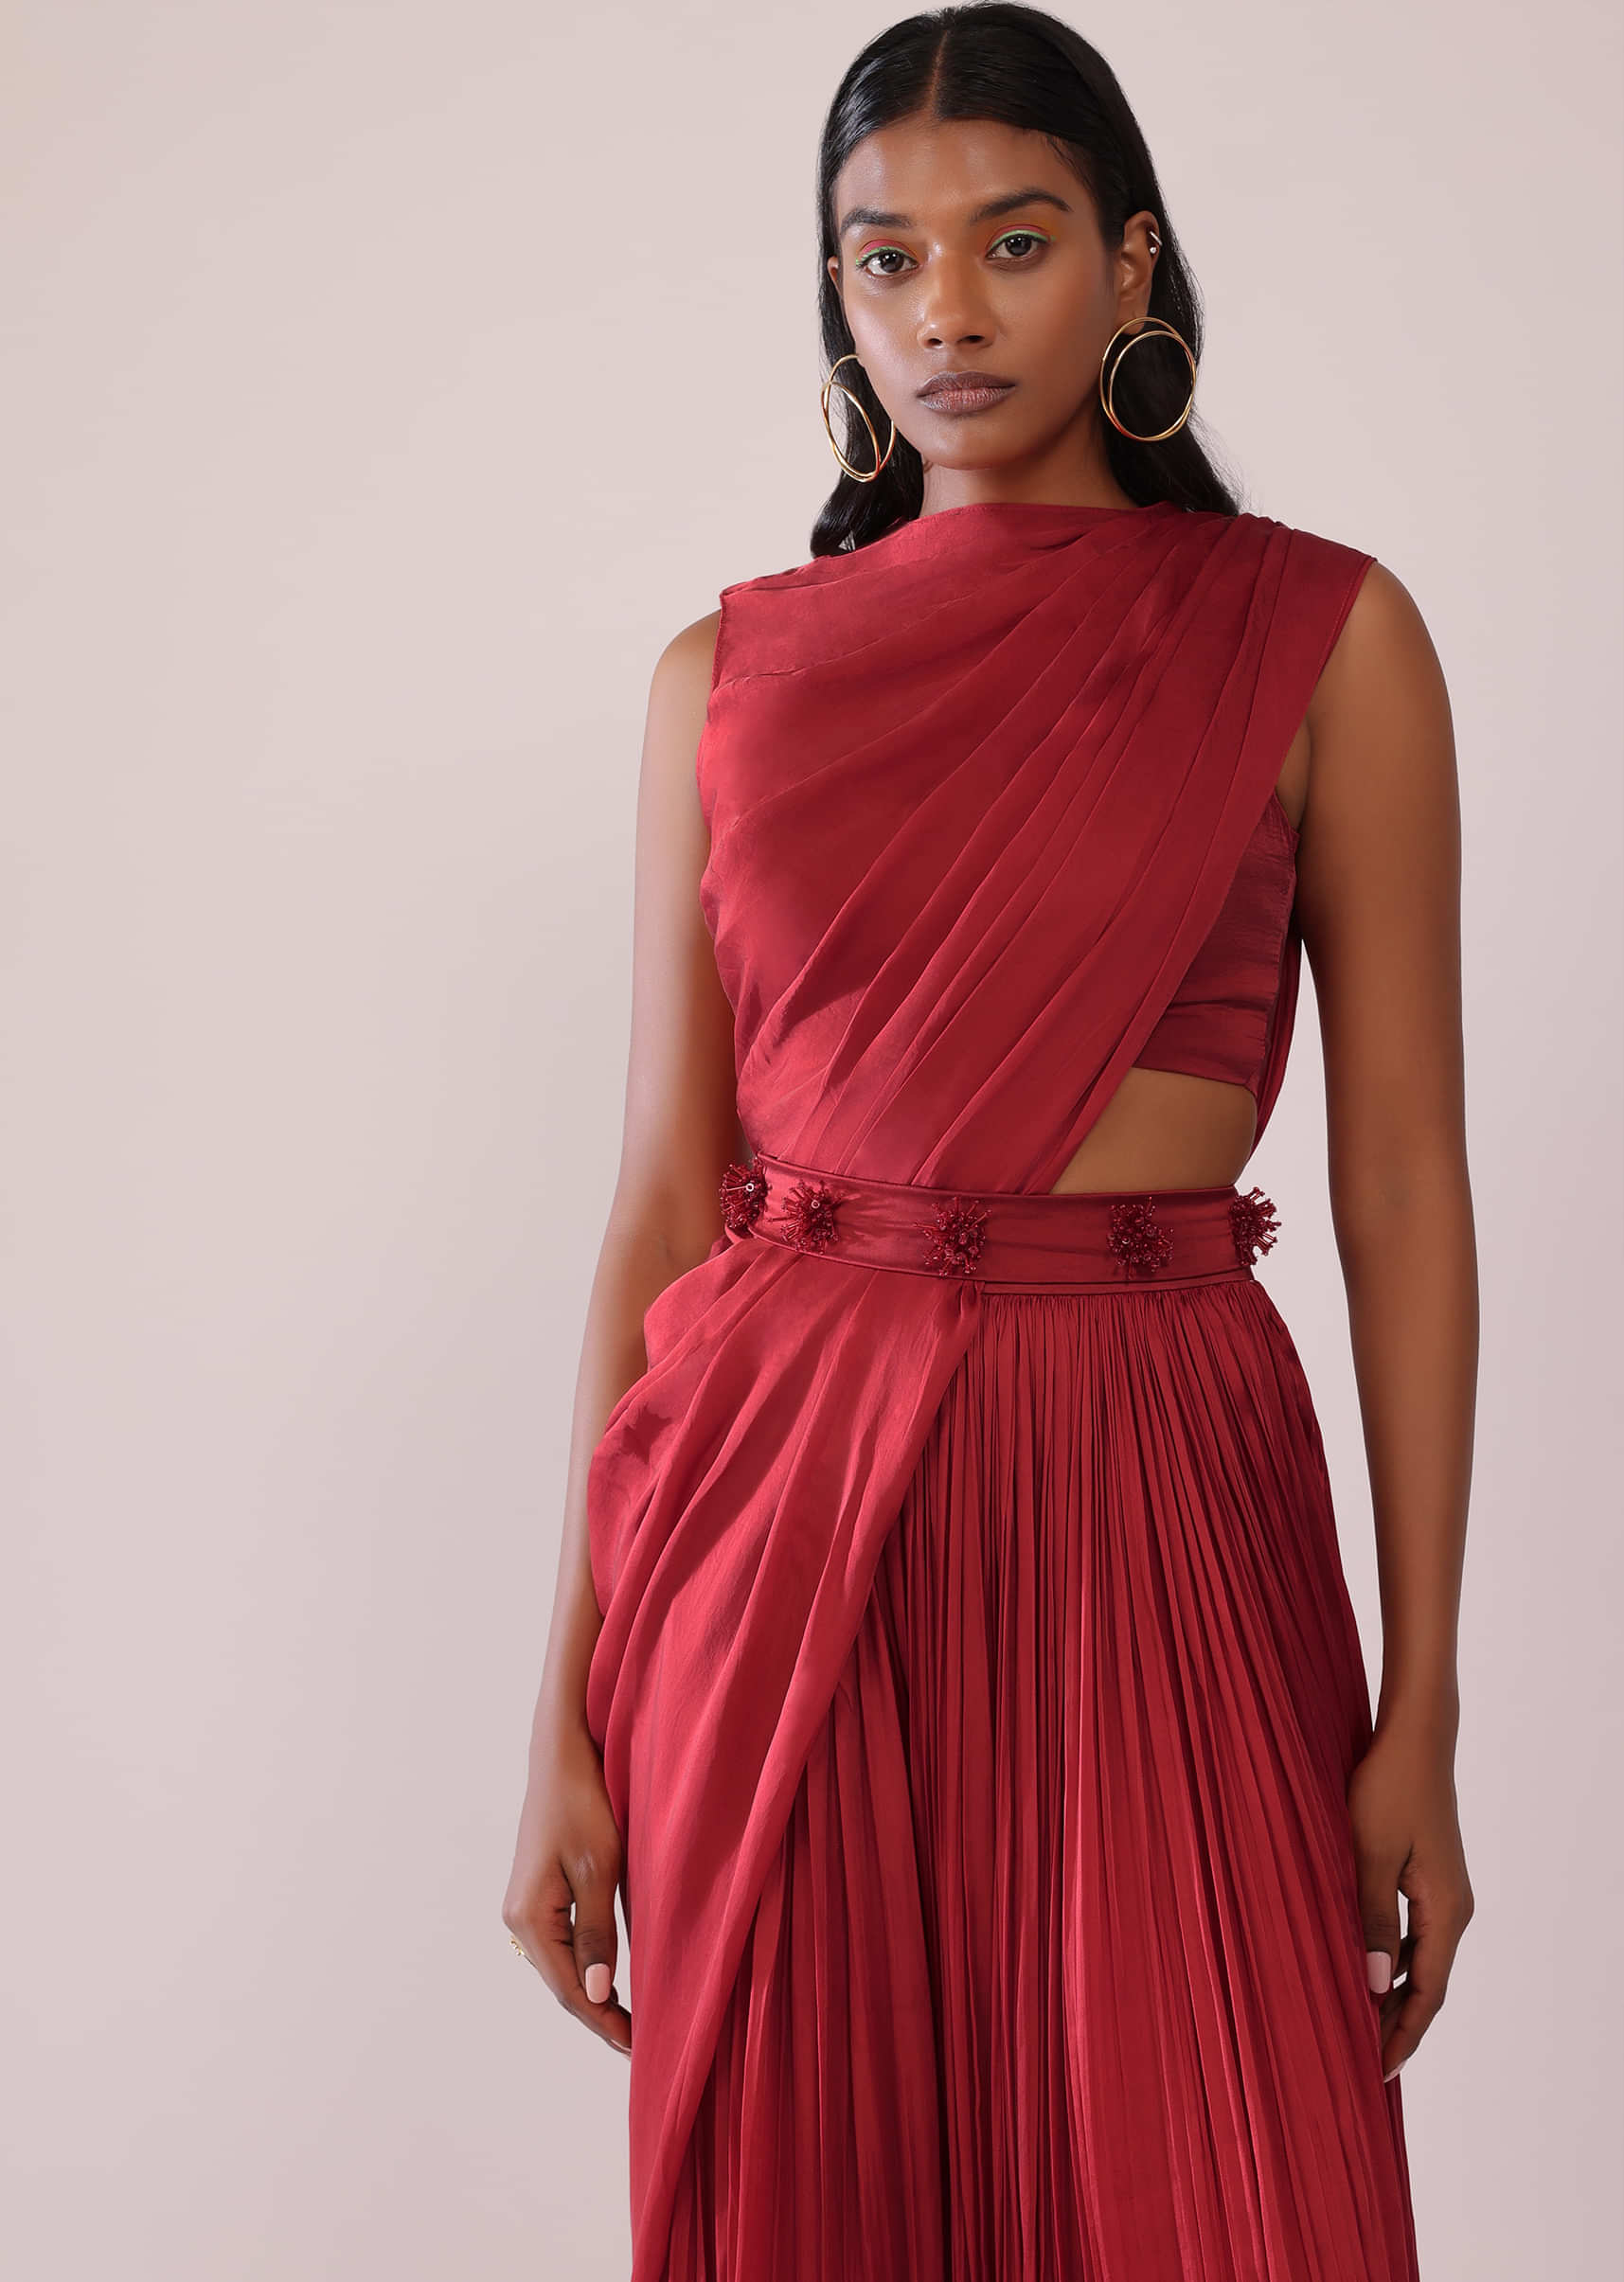 Maroon Red Satin Rushing Palazzo And Bustier Set With Draped Cape